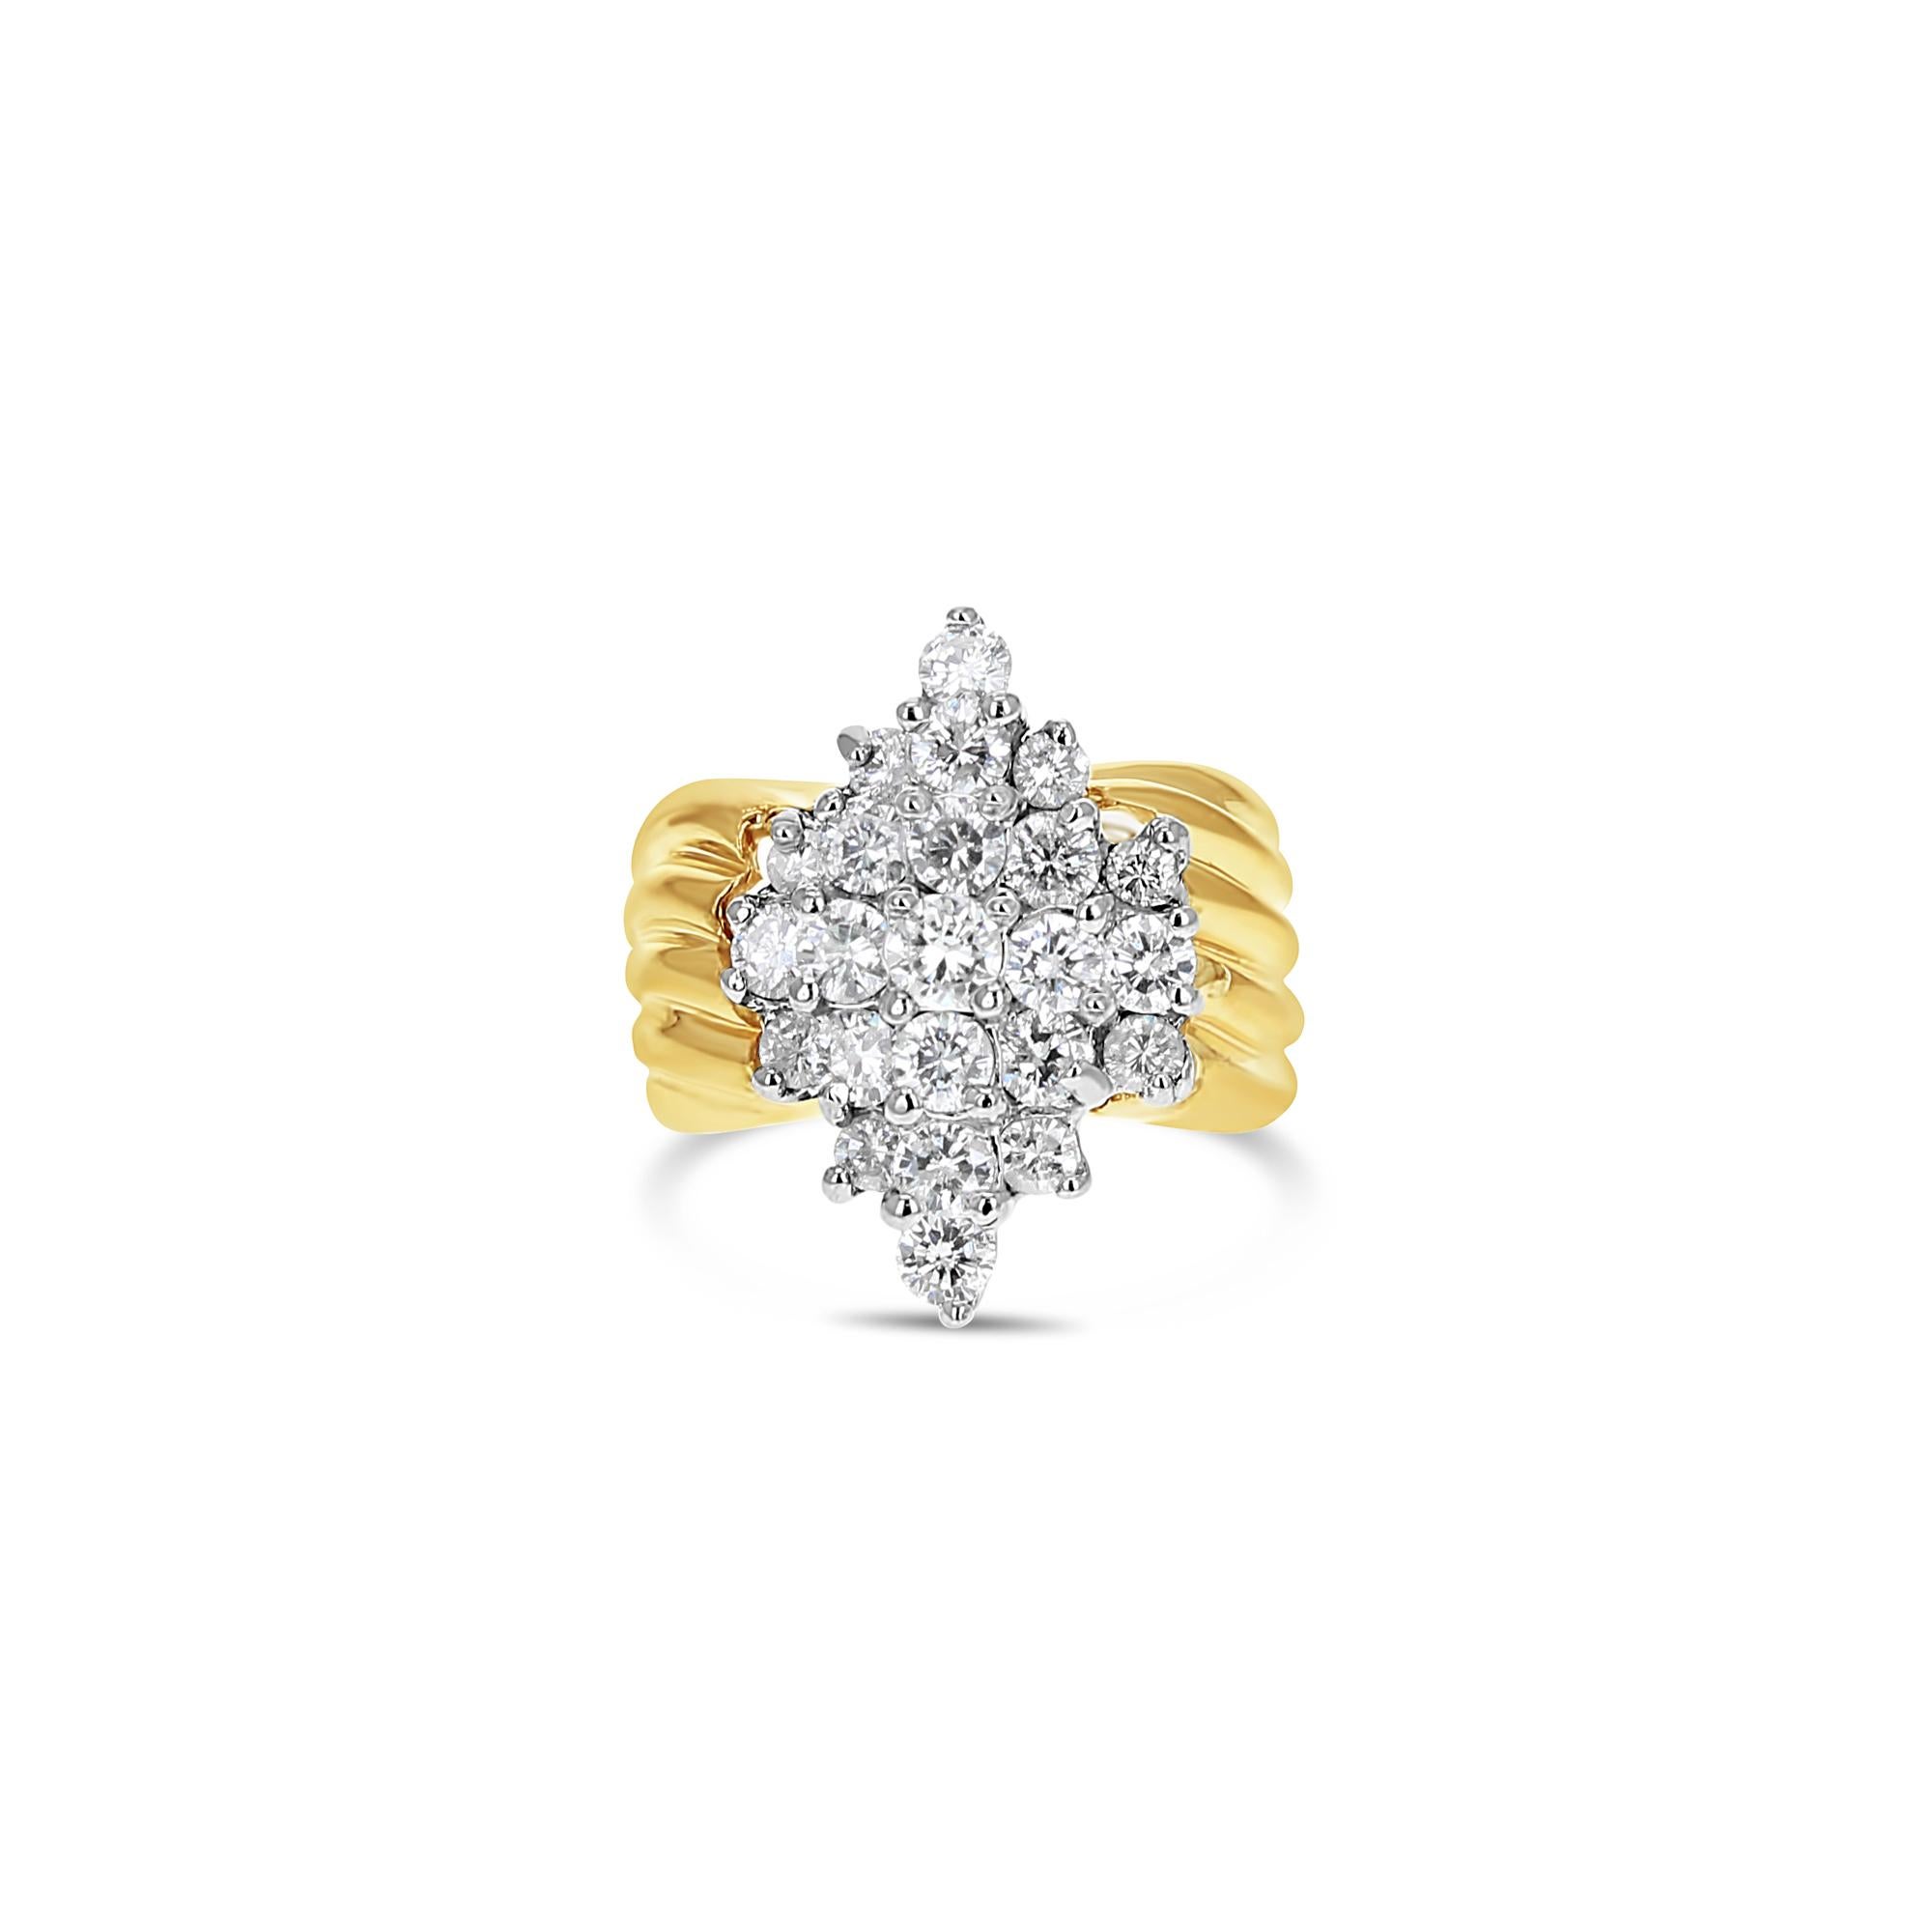 2 Carat Diamond Cluster Ring 14k Yellow Gold or 14k White Gold In New Condition For Sale In Sugar Land, TX